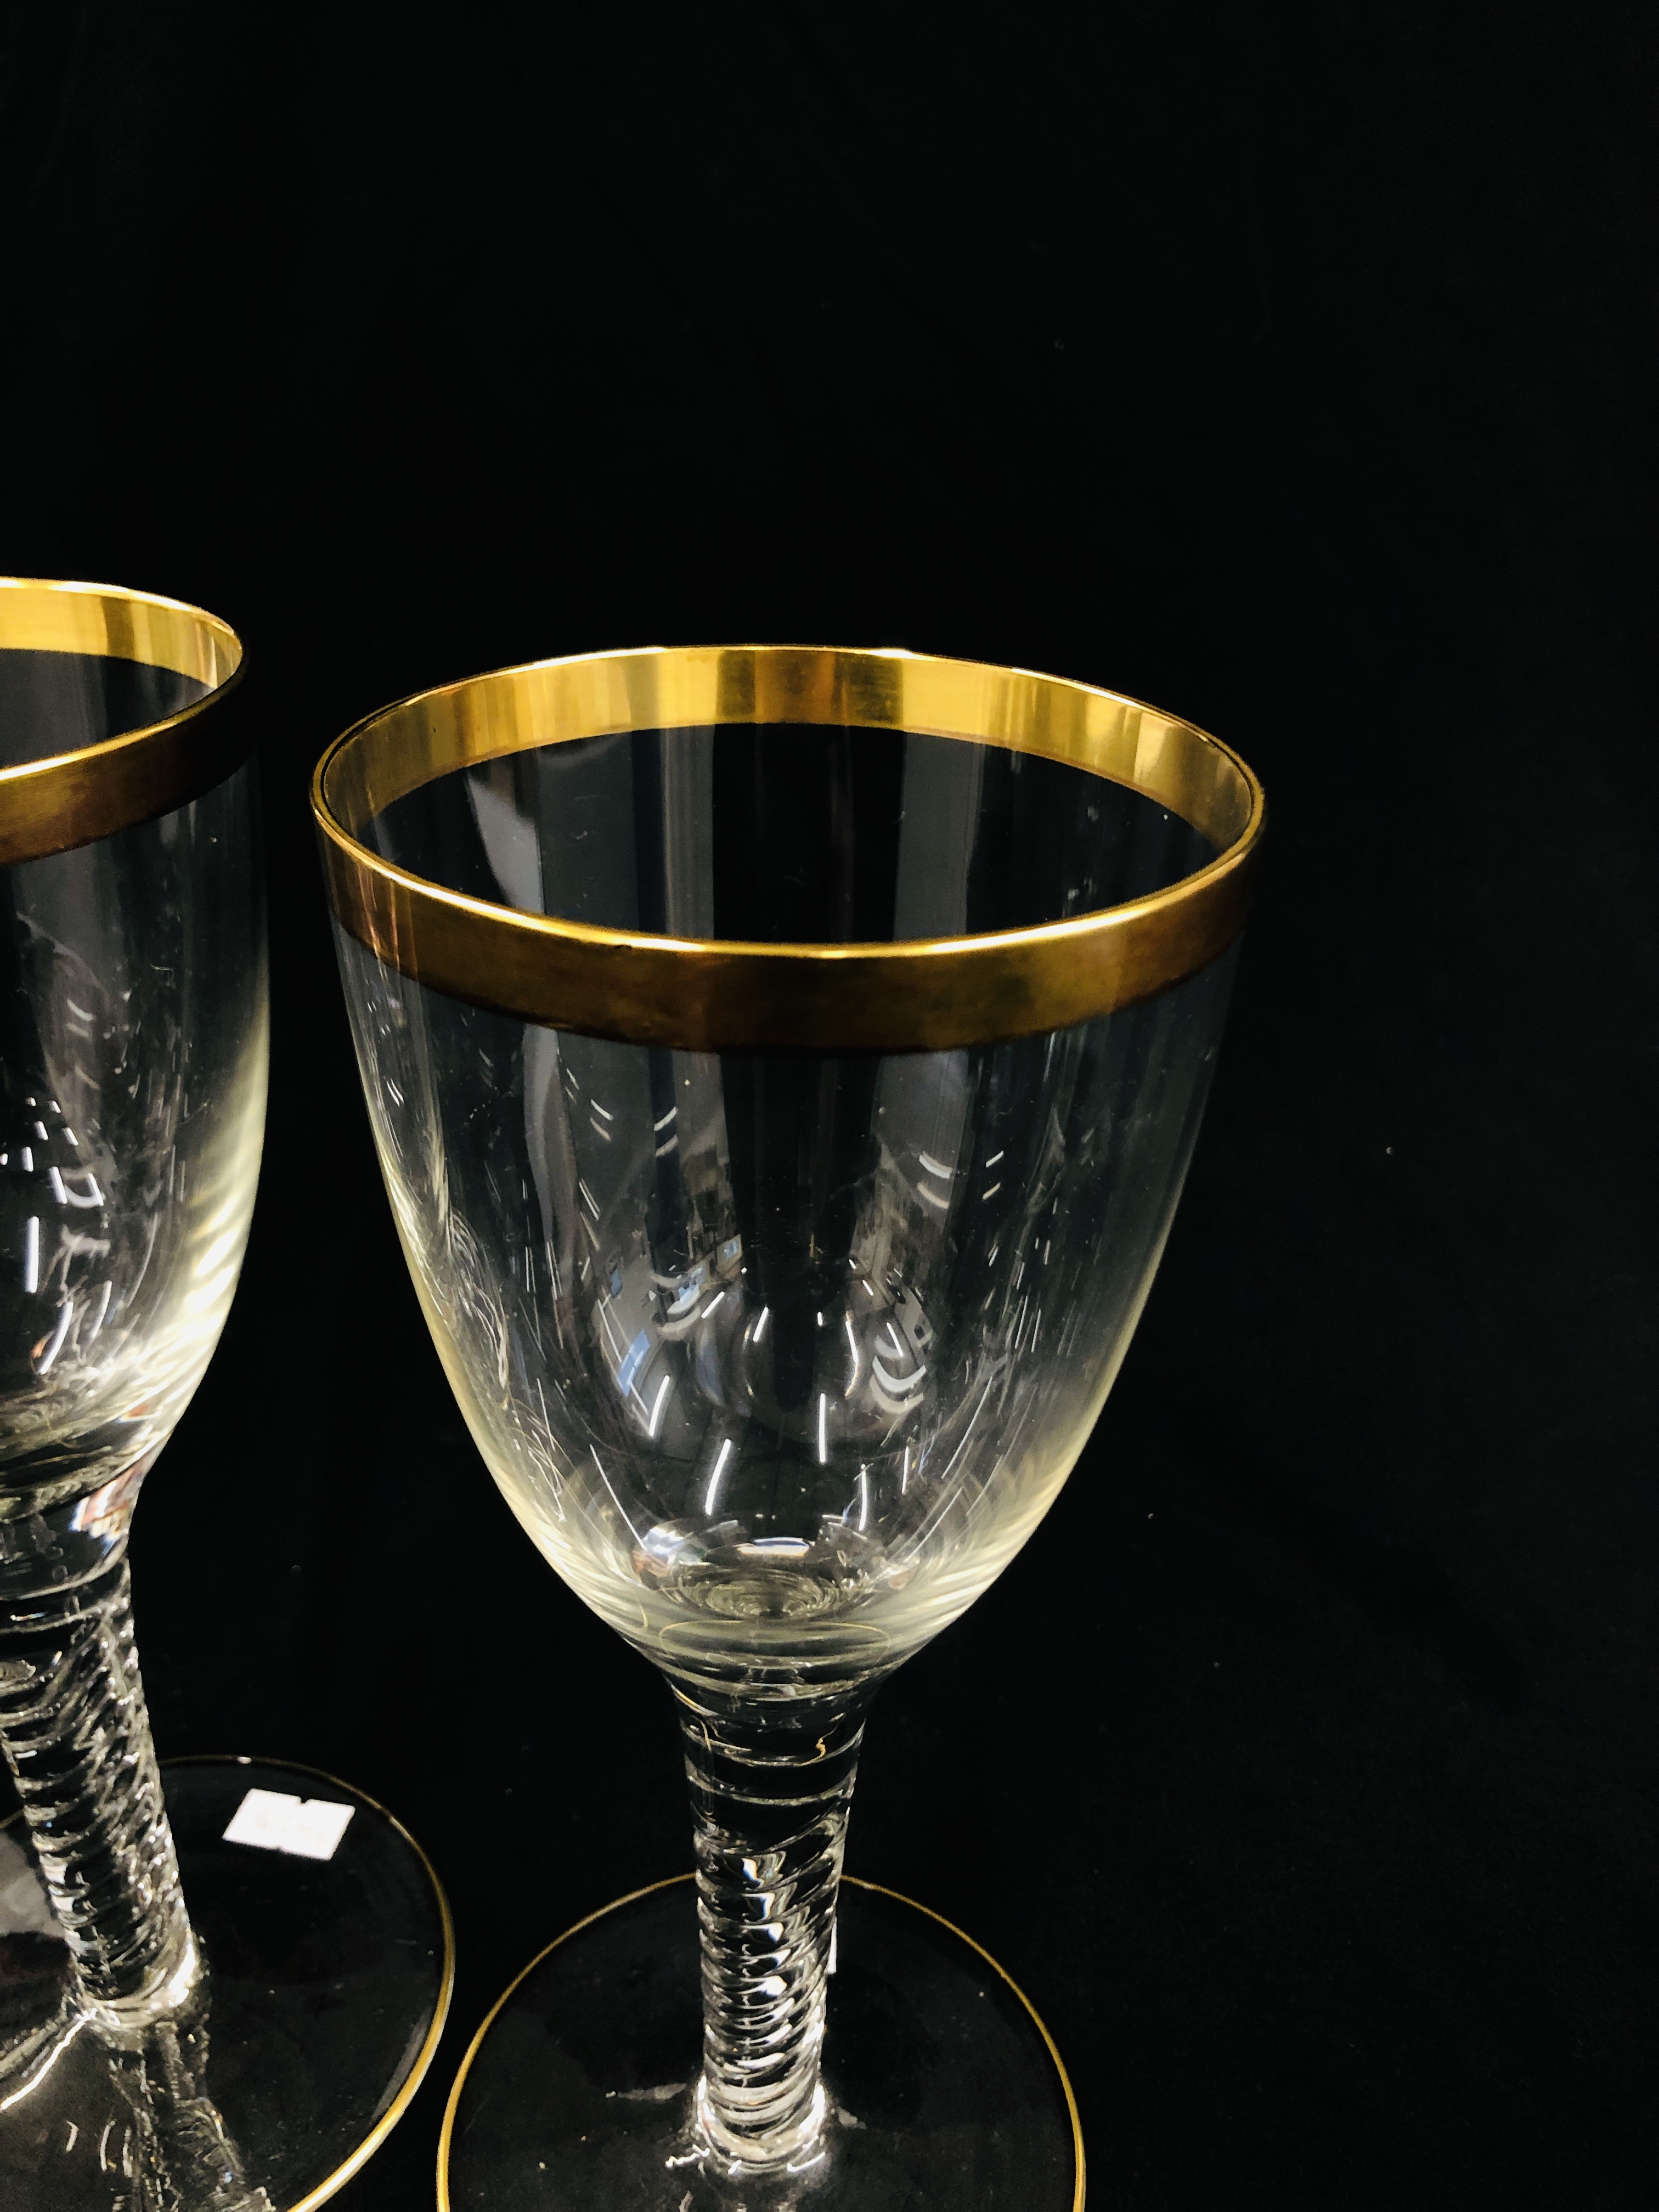 THREE TRUMPET BOWL GLASSES WITH GILDED RIMS. H 24CM. - Image 3 of 7